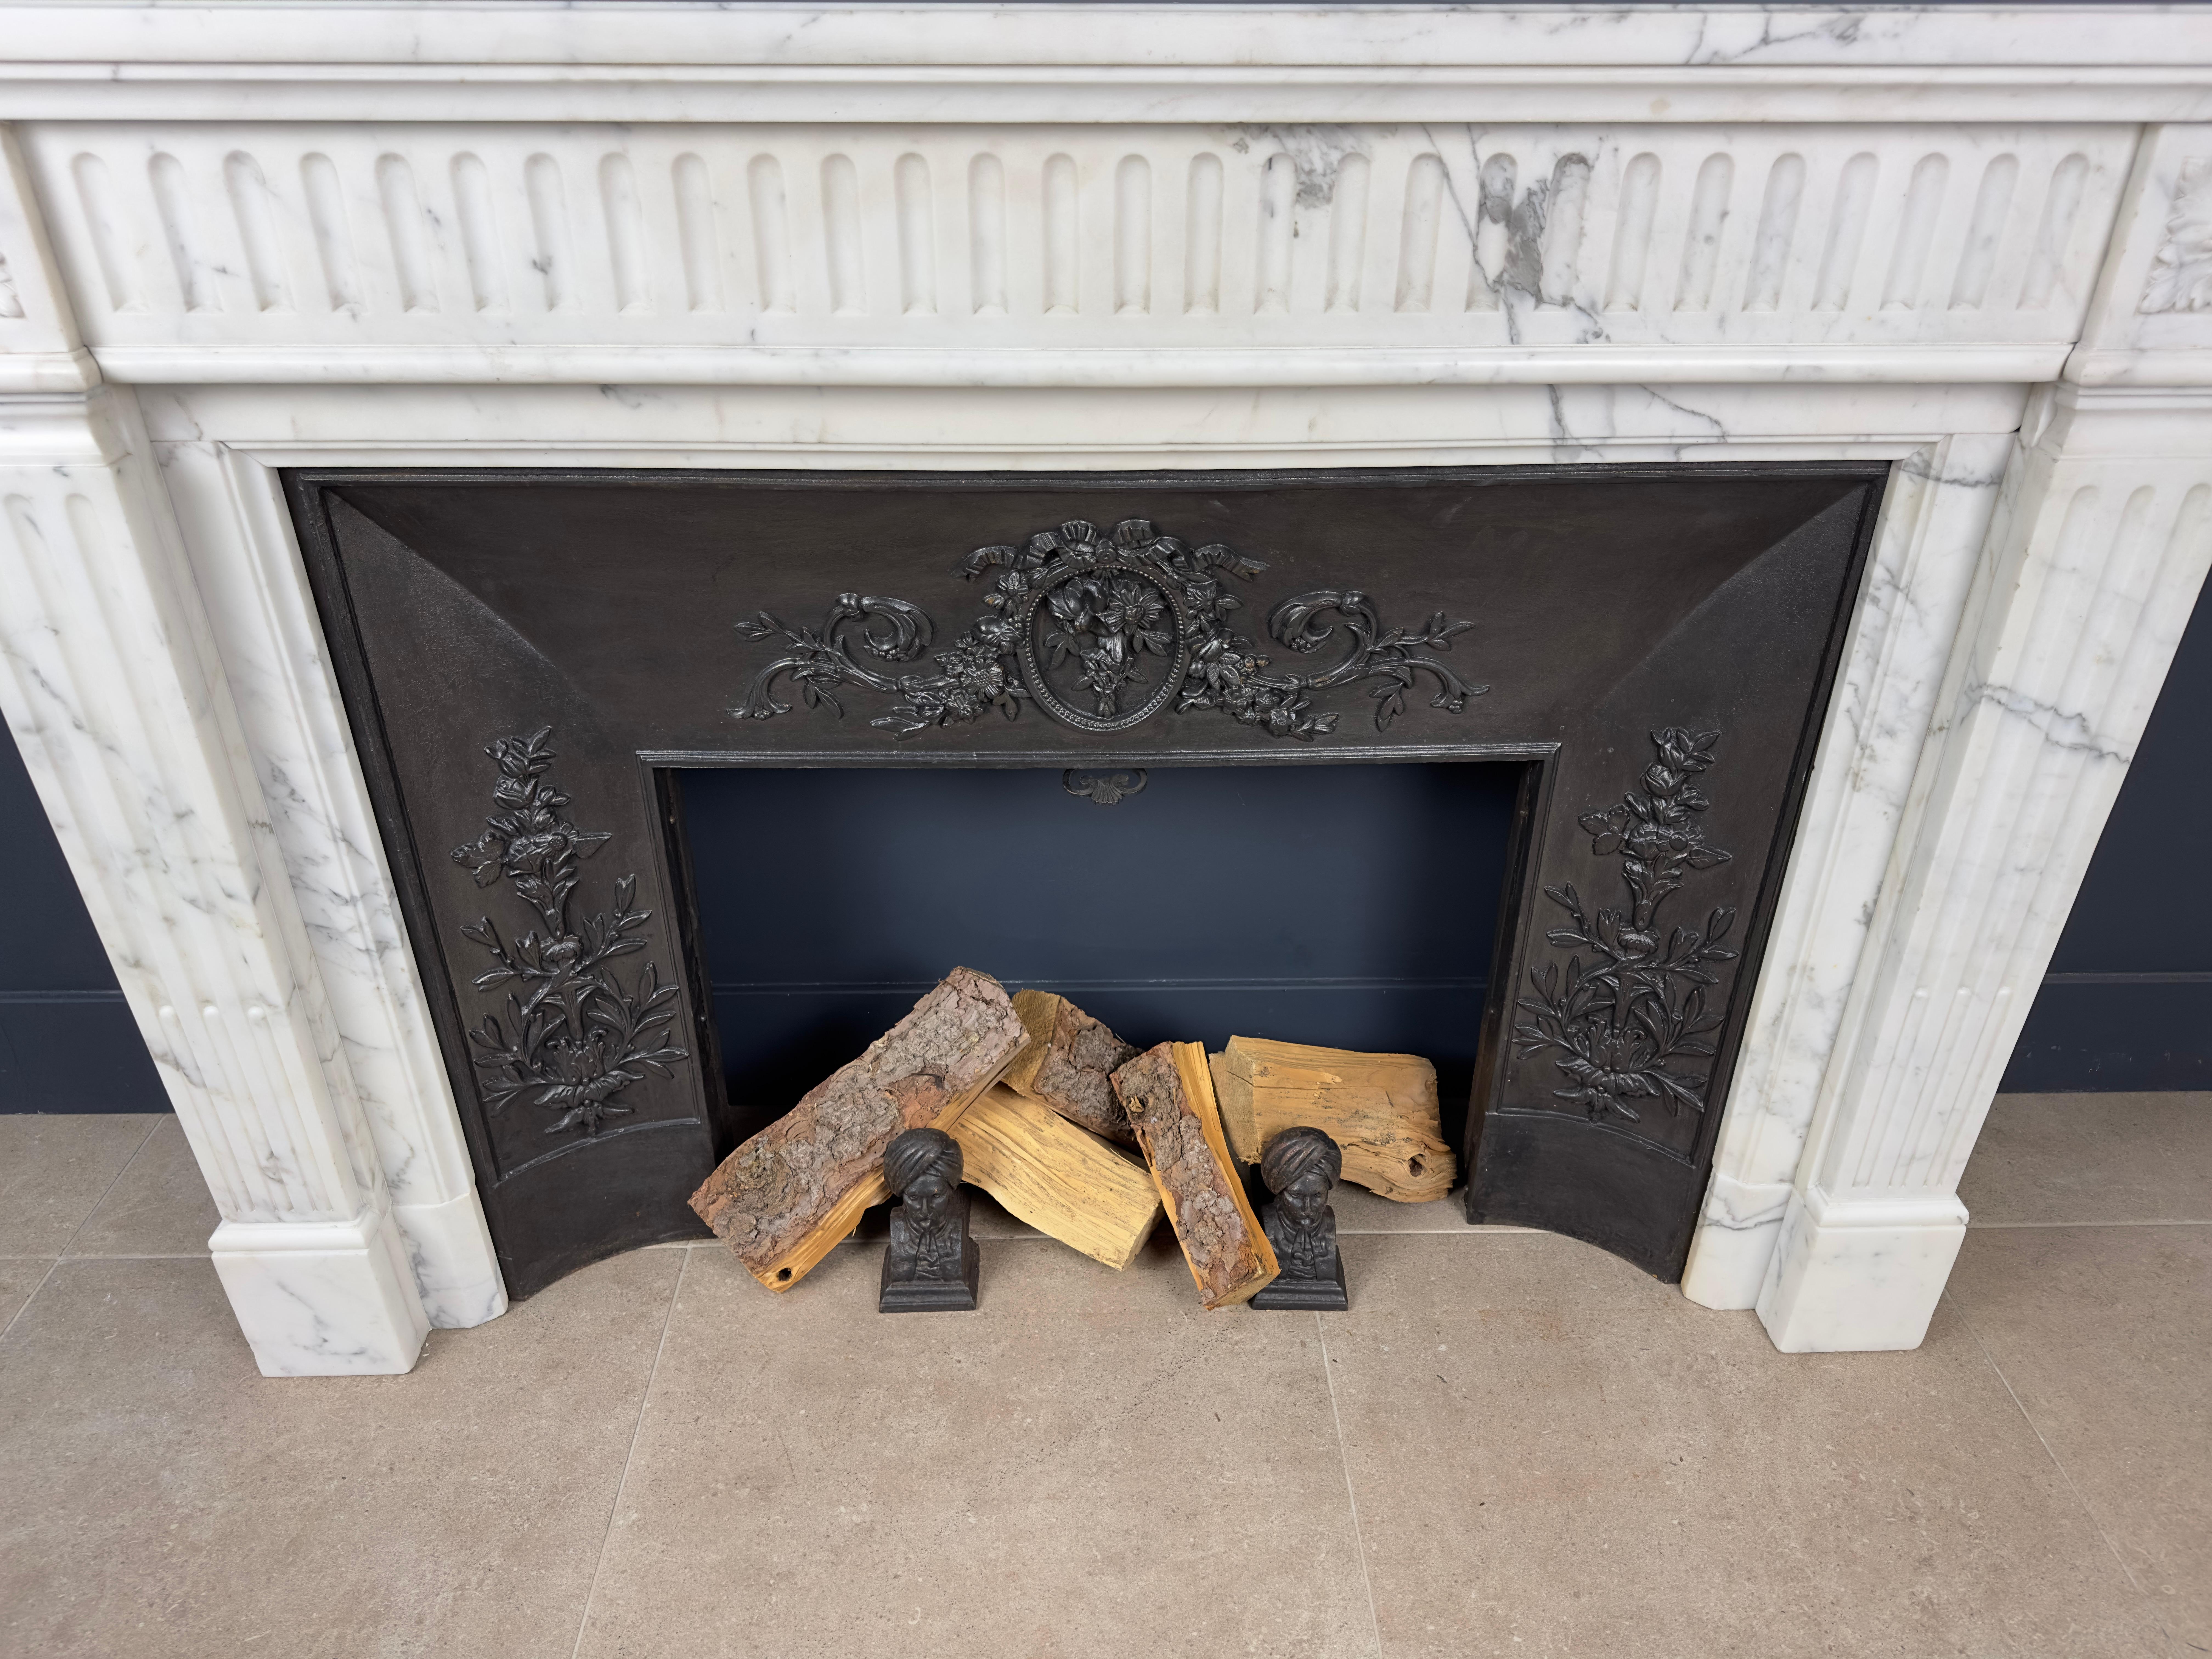 

Step back in time with our Antique French Carrara Marble Fireplace, a true gem that reflects the elegance of days gone by. The Carrara marble gives this fireplace a timeless splendor, and the beautiful cast iron insert adds a chic detail that